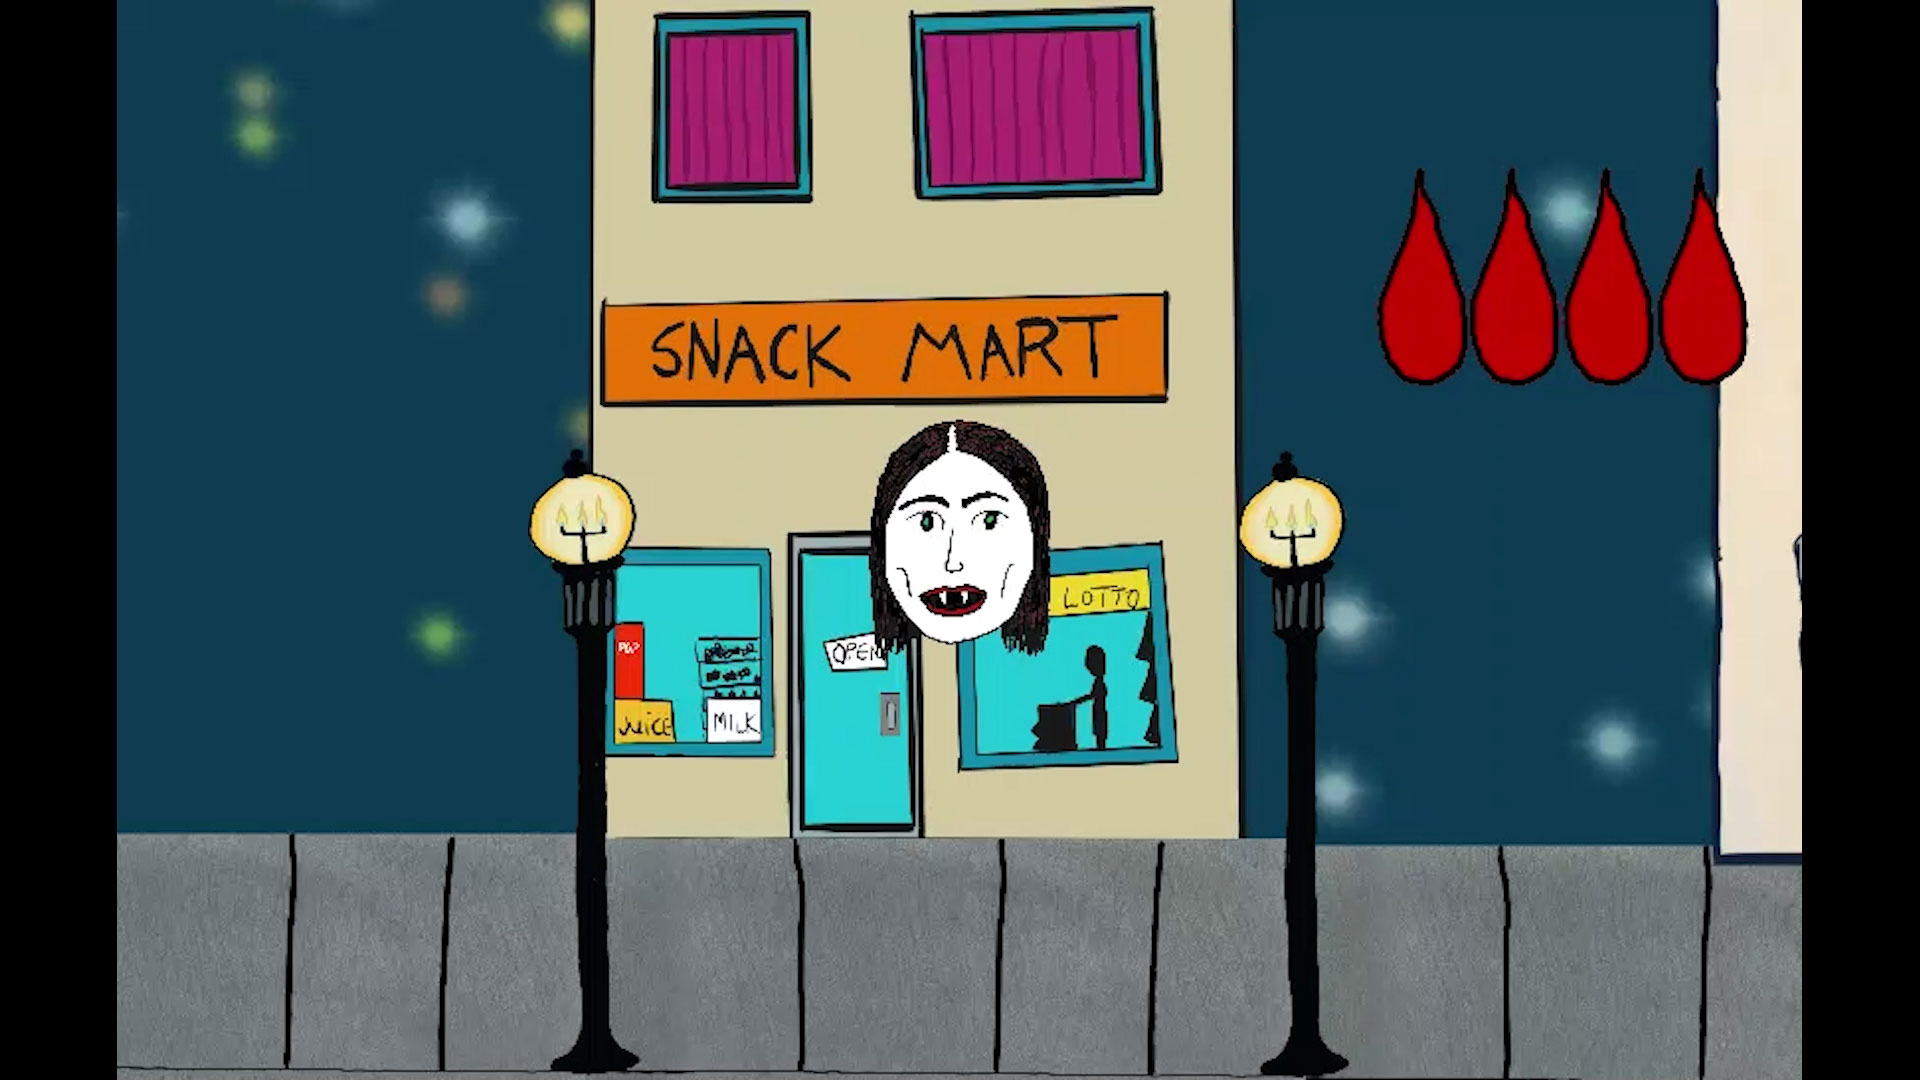 a lesbian vampire cartoon illustration with a building reading "snack mart"